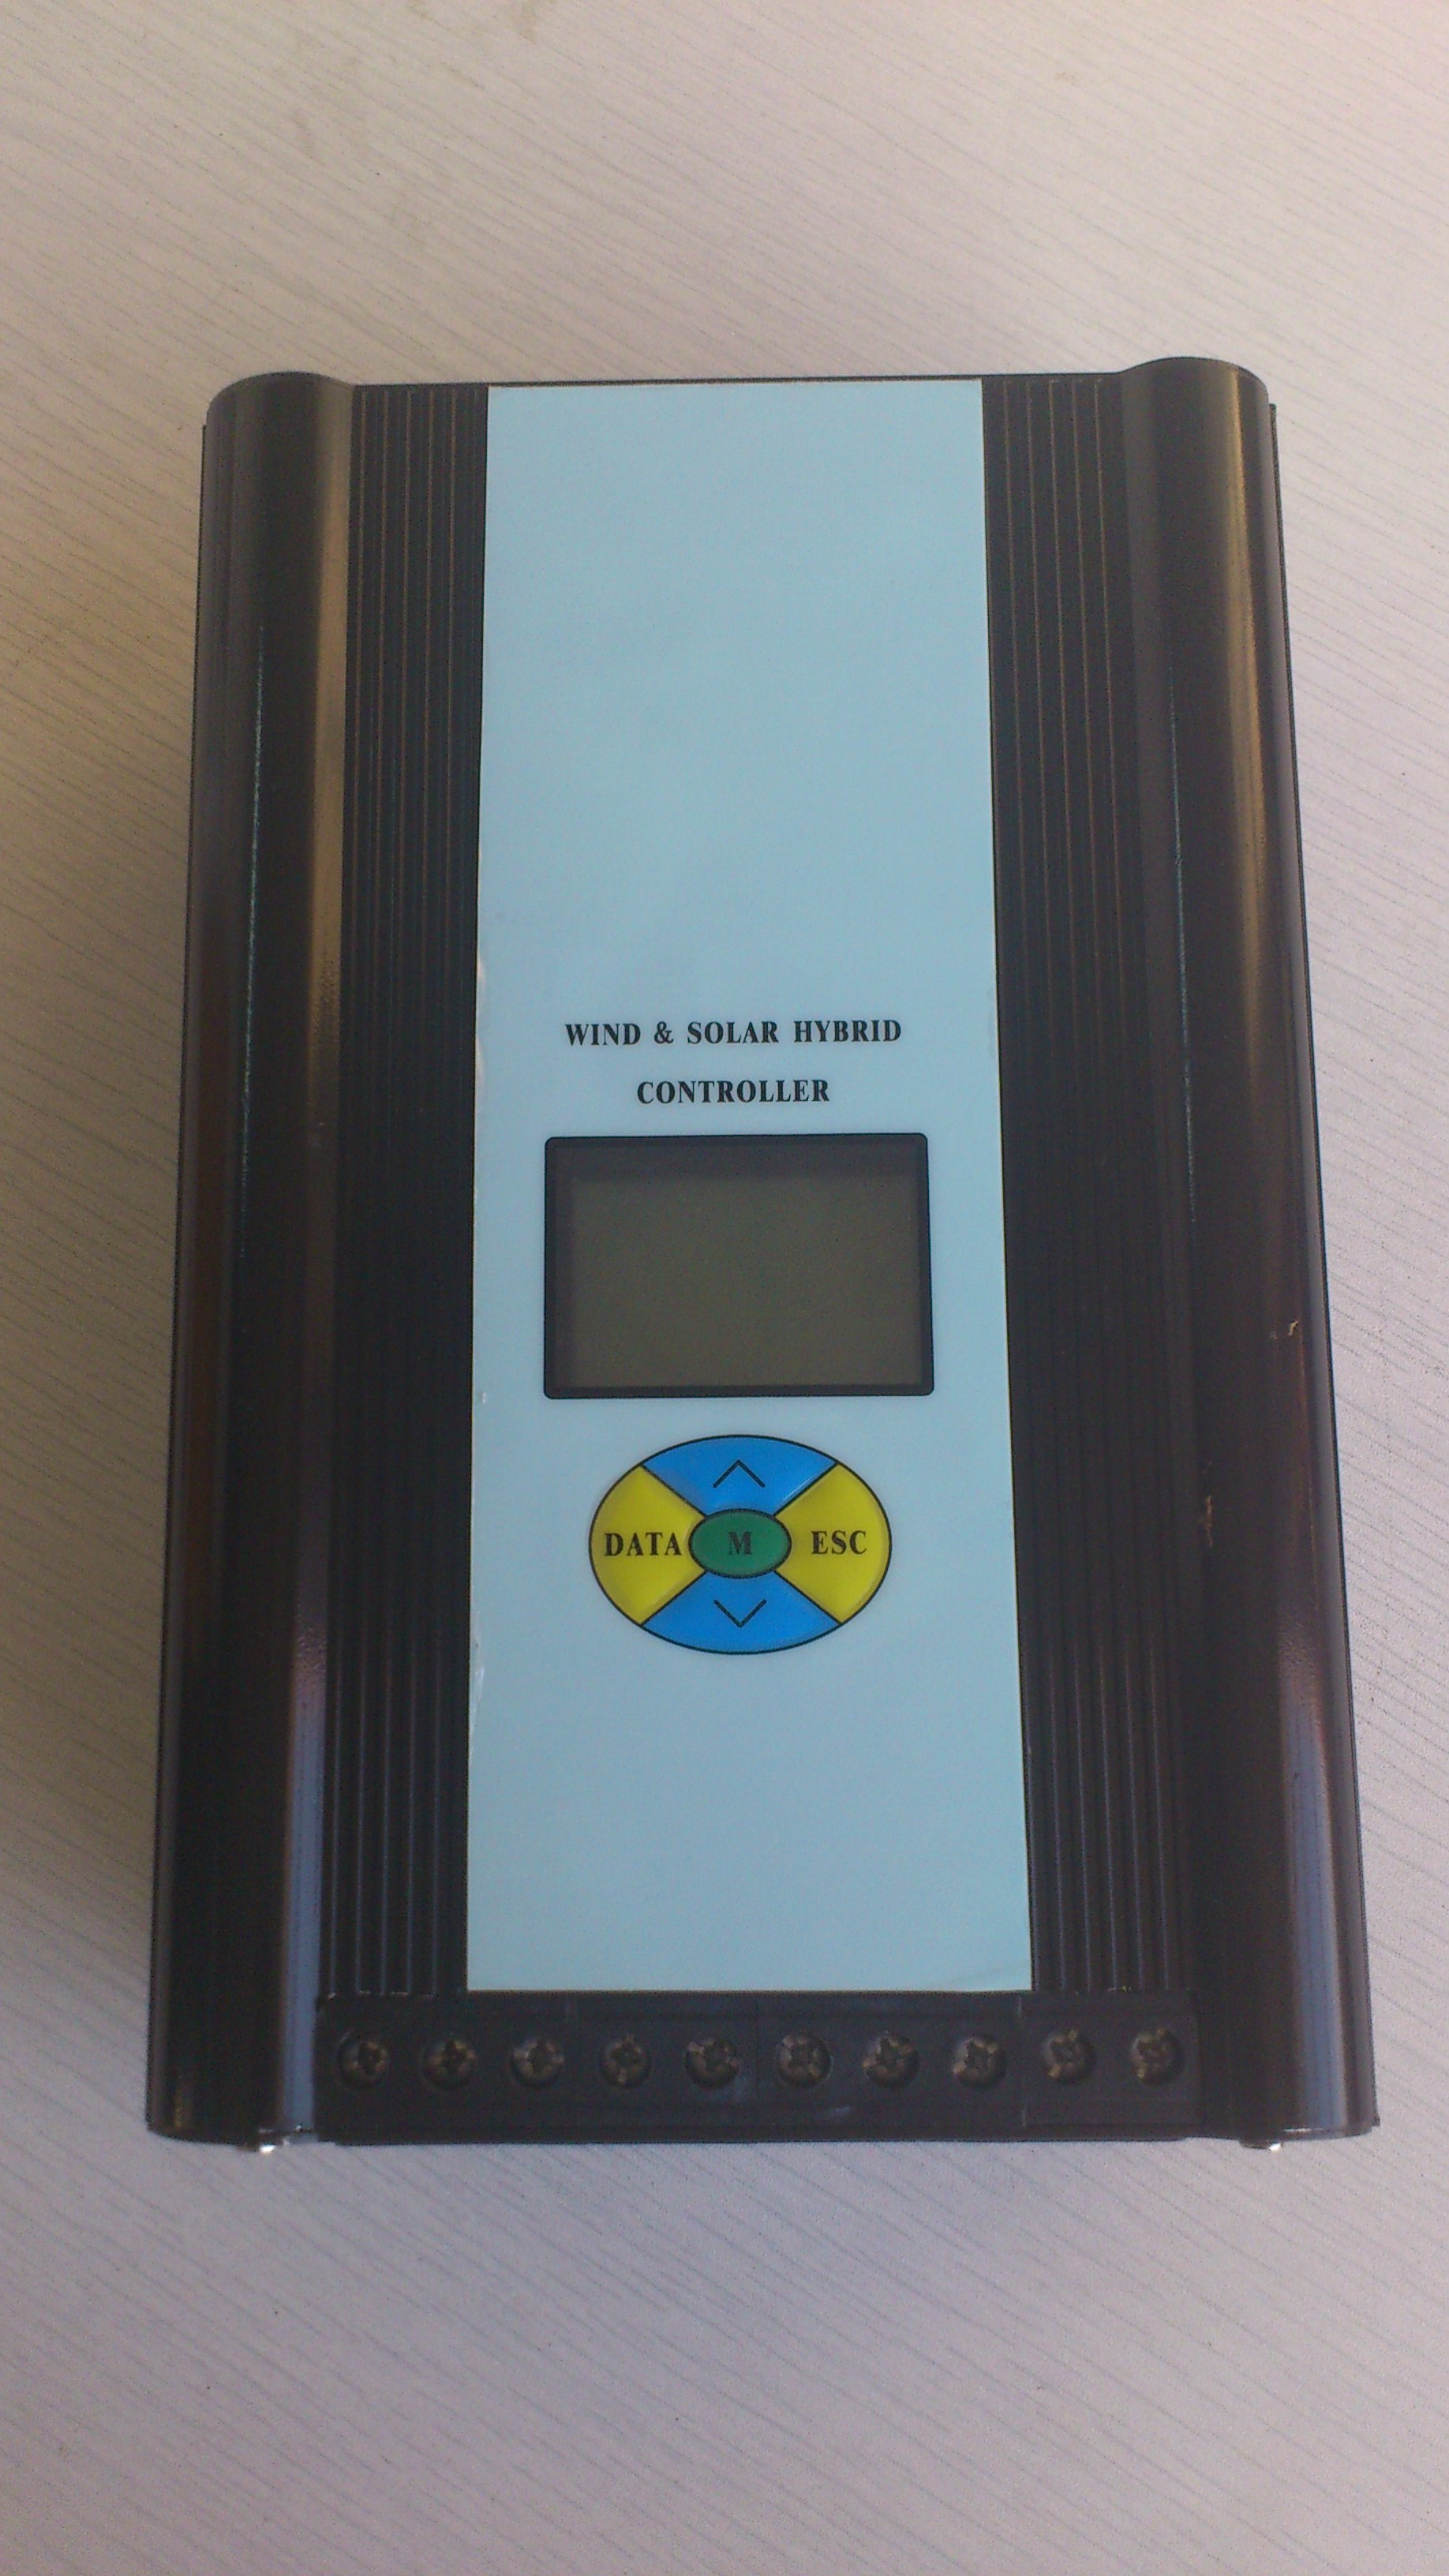 Low voltage charge wind %26solar hybrid controller